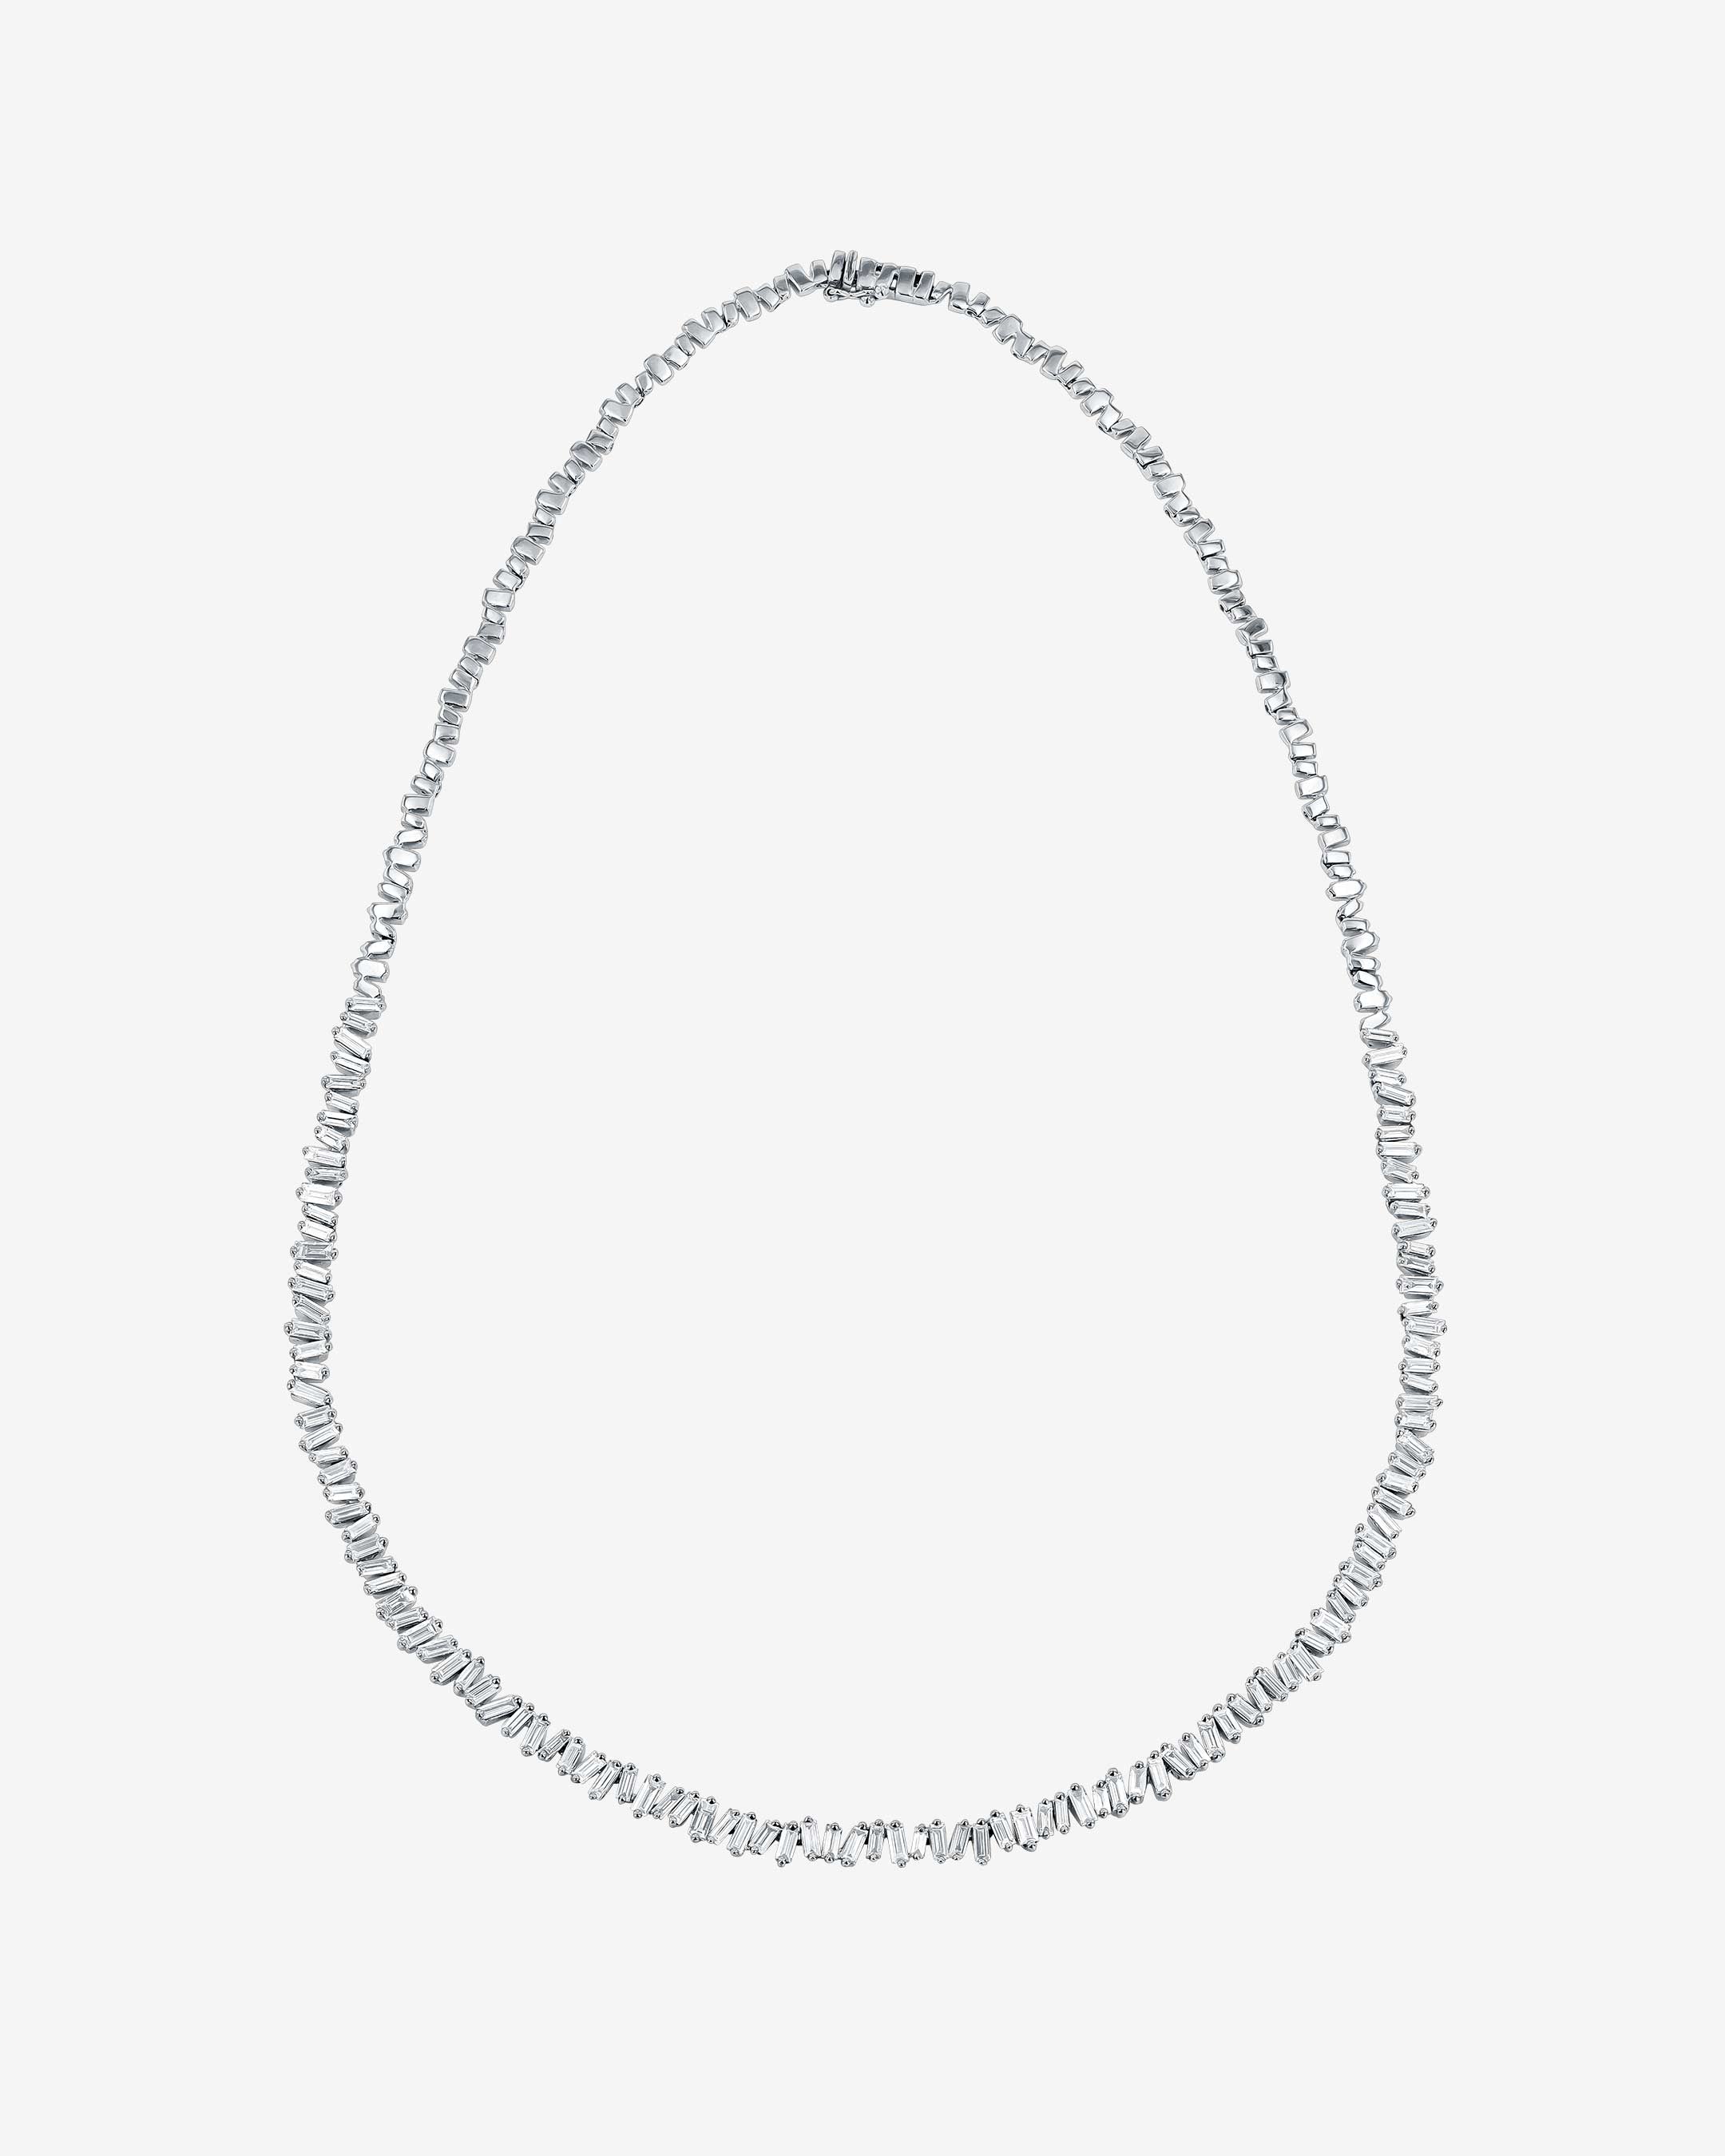 Suzanne Kalan Classic Diamond Tennis Necklace in 18k white gold